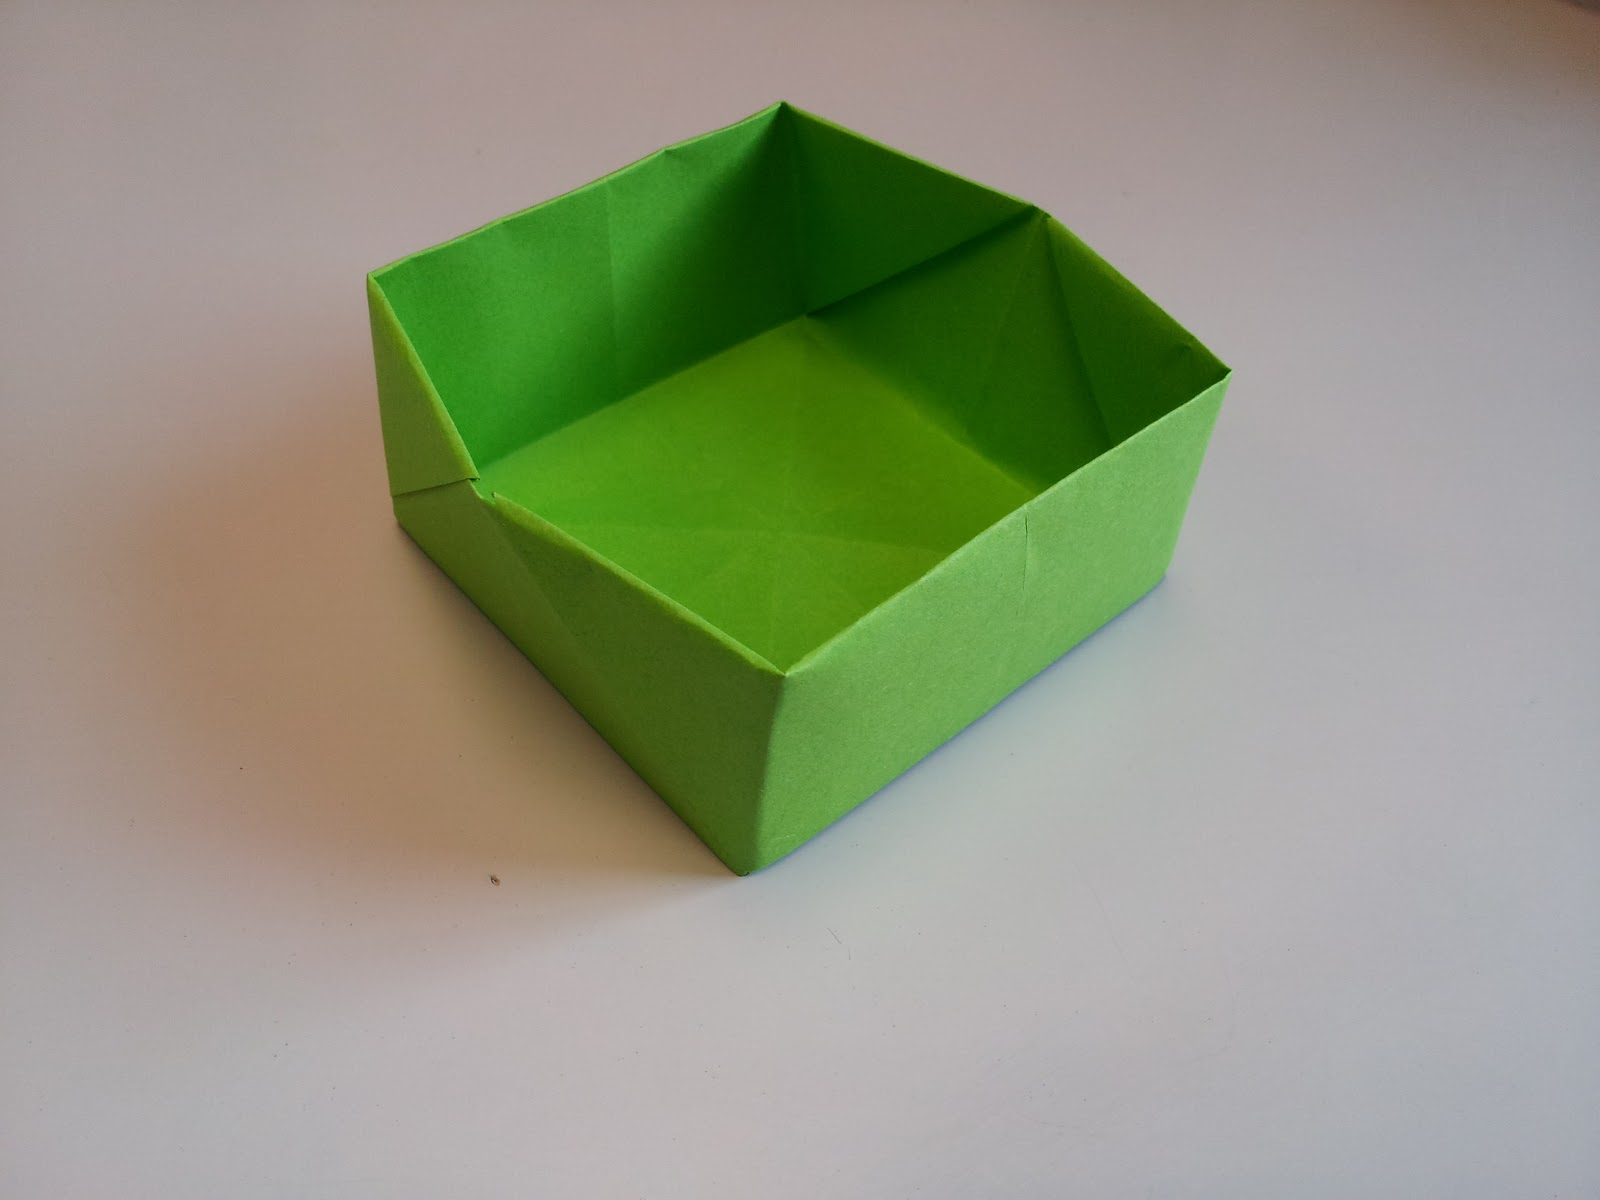 How To Do A Origami Box Paper Moon How To Make An Origami Box